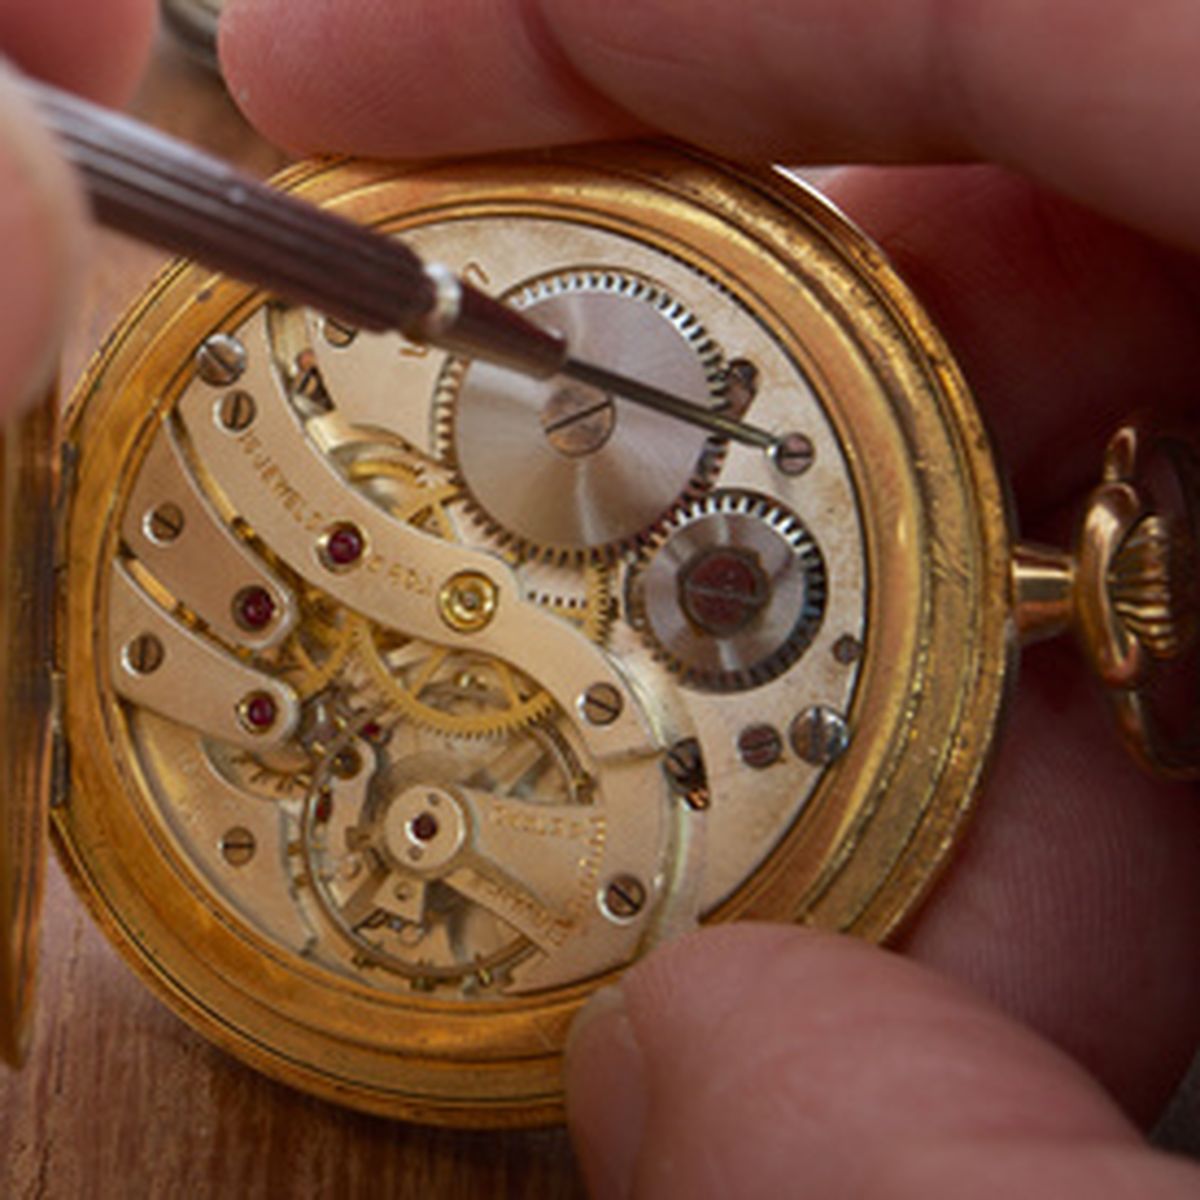 Restoring American, French, English and German antique watches